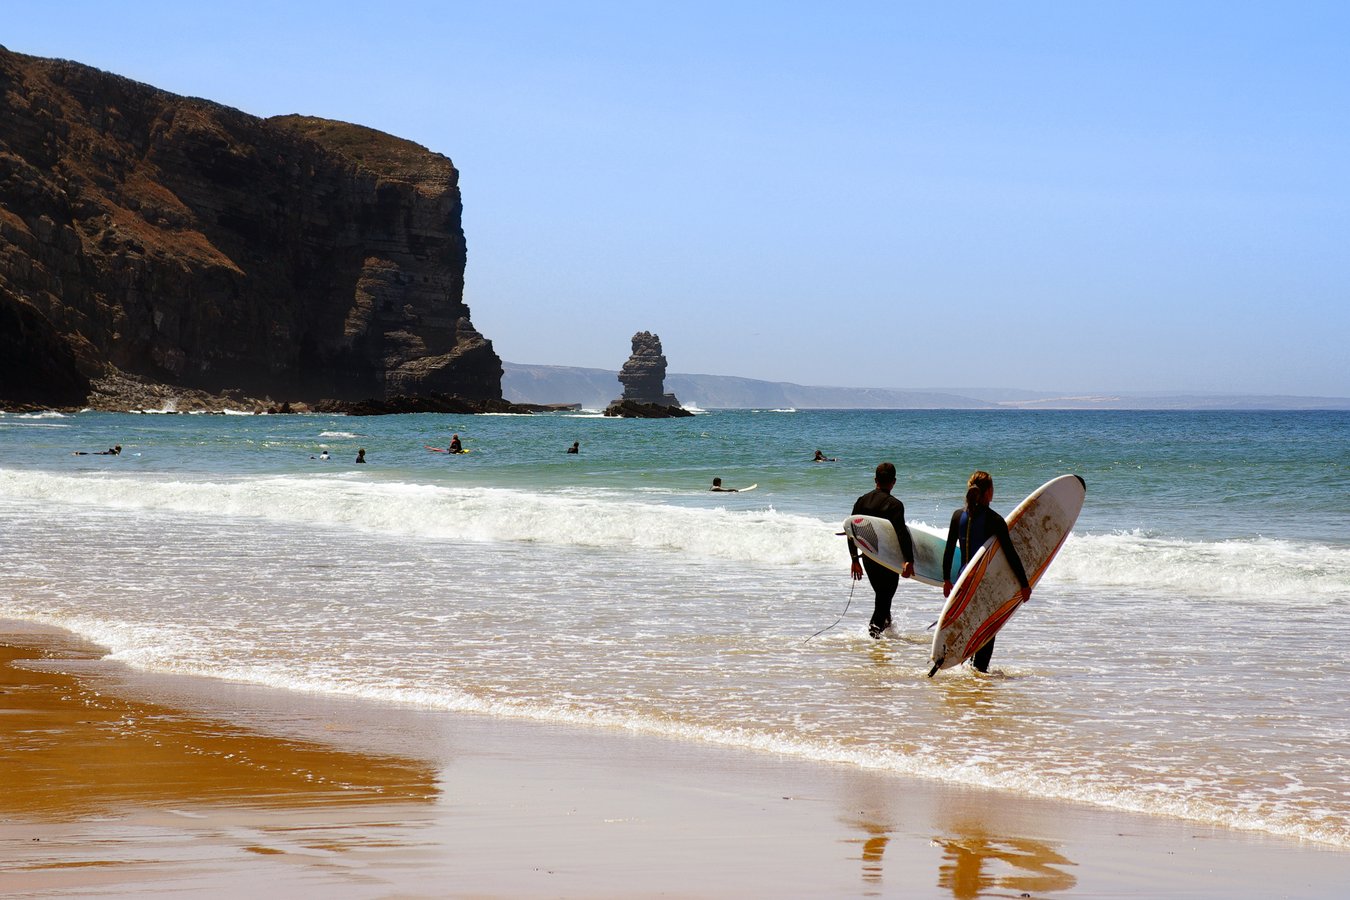 surfers ready to enter the sea in arrifana beach, algarve portugal.